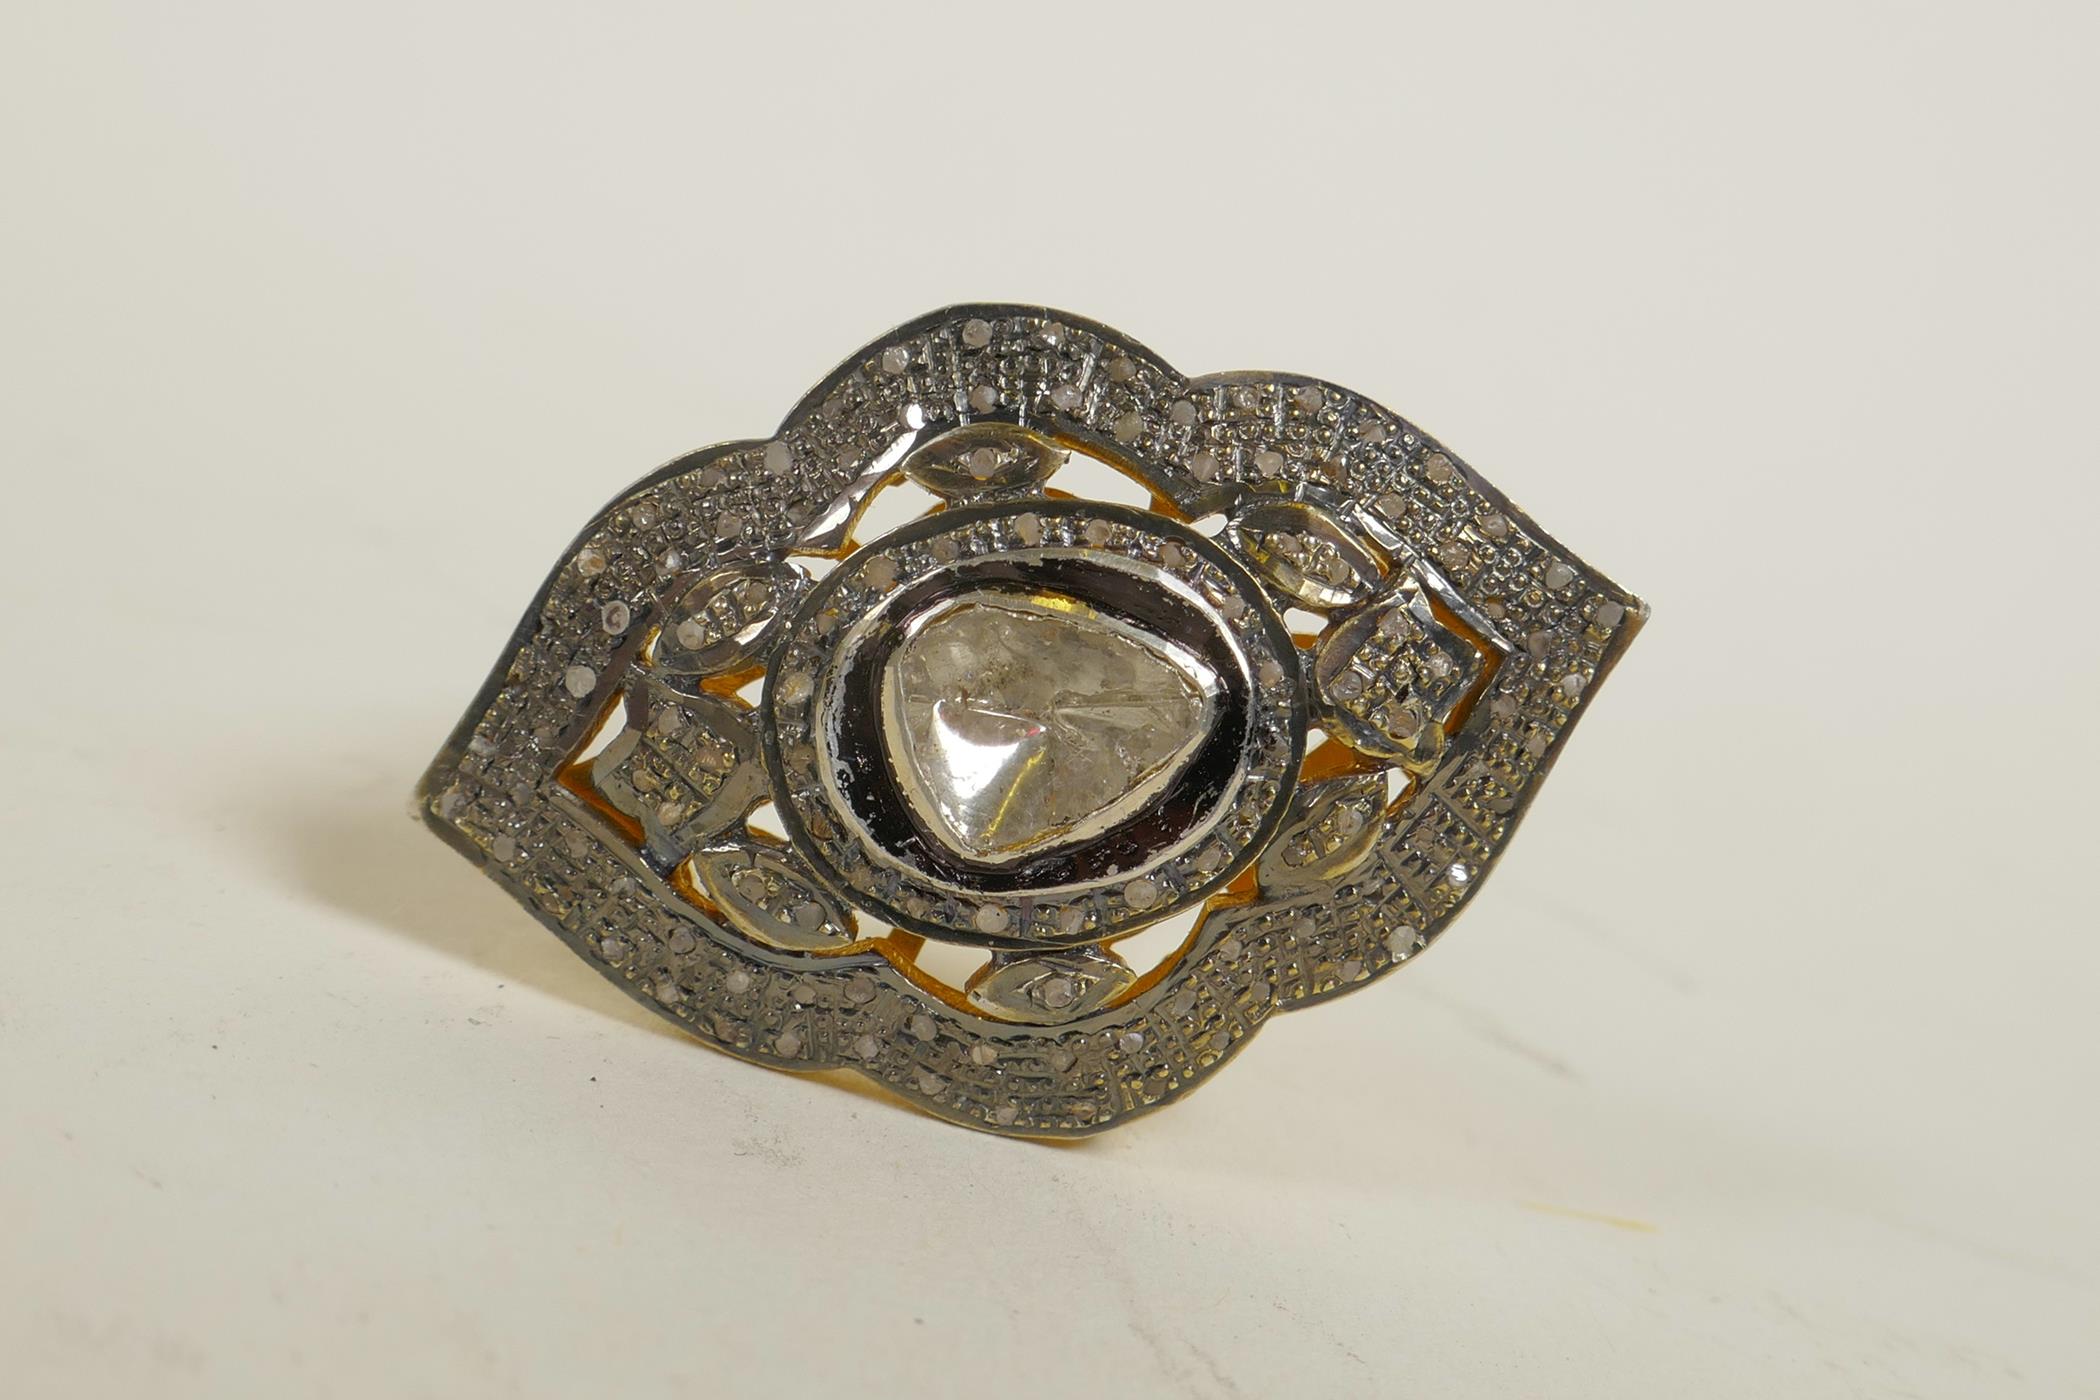 A silver gilt dress ring of diamond form, set with uncut diamonds - Image 2 of 3